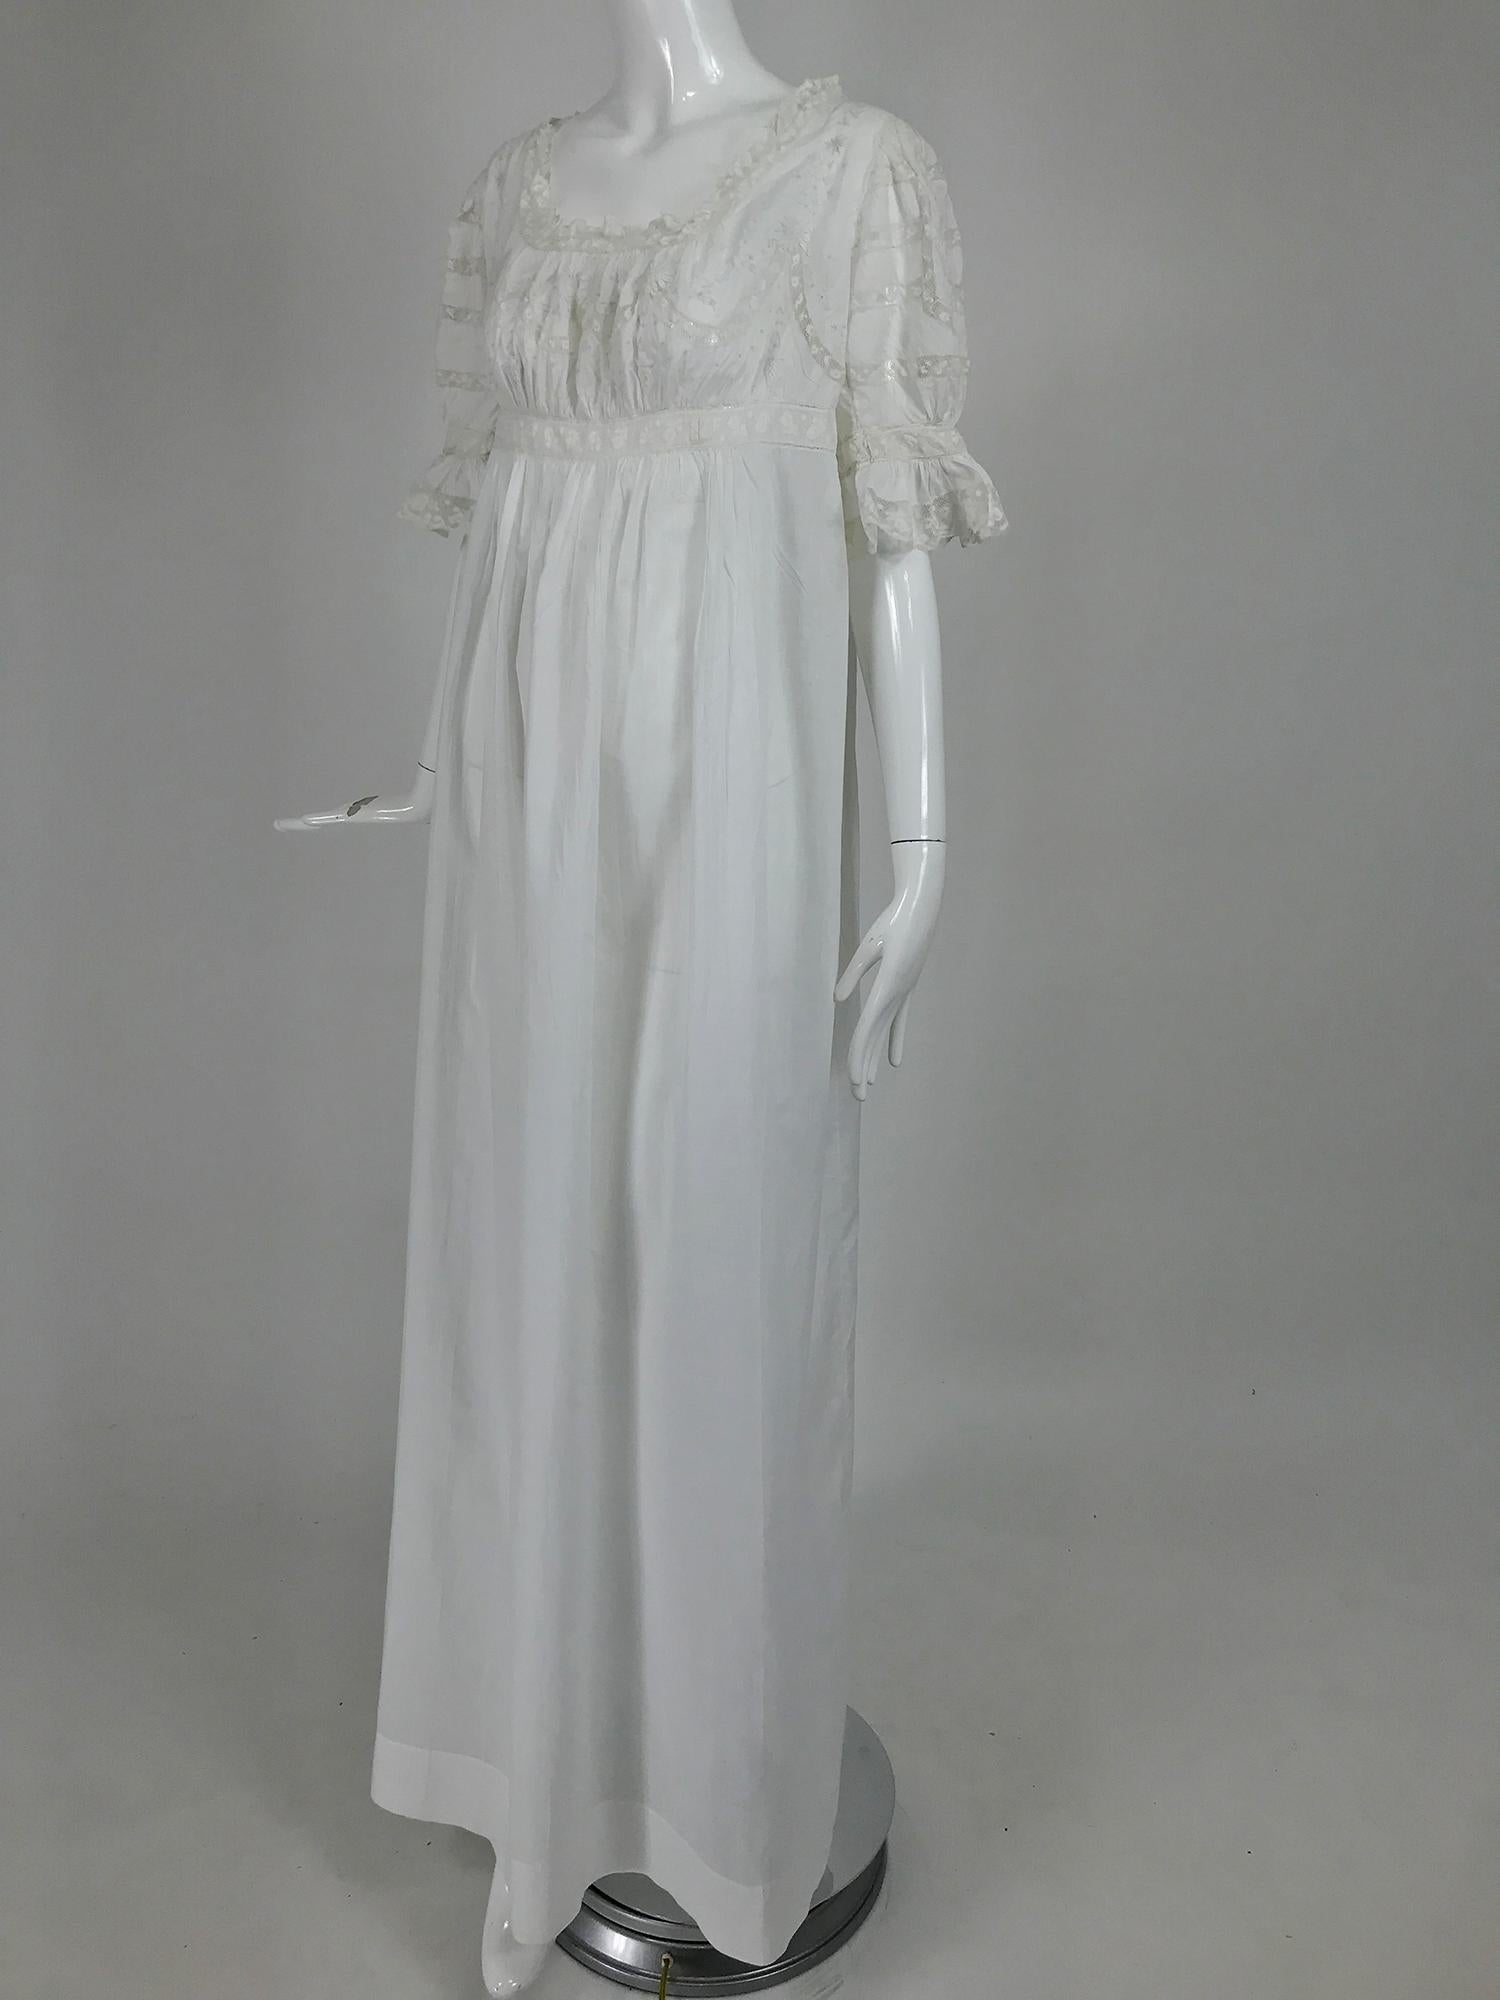 Victorian embroidered cotton batiste lace gown embroidered with the name Hattie from the early 1900s. This beautiful gown was never worn, it still has the pencil order number written on the upper back. It has the name of the owner Hattie embroidered